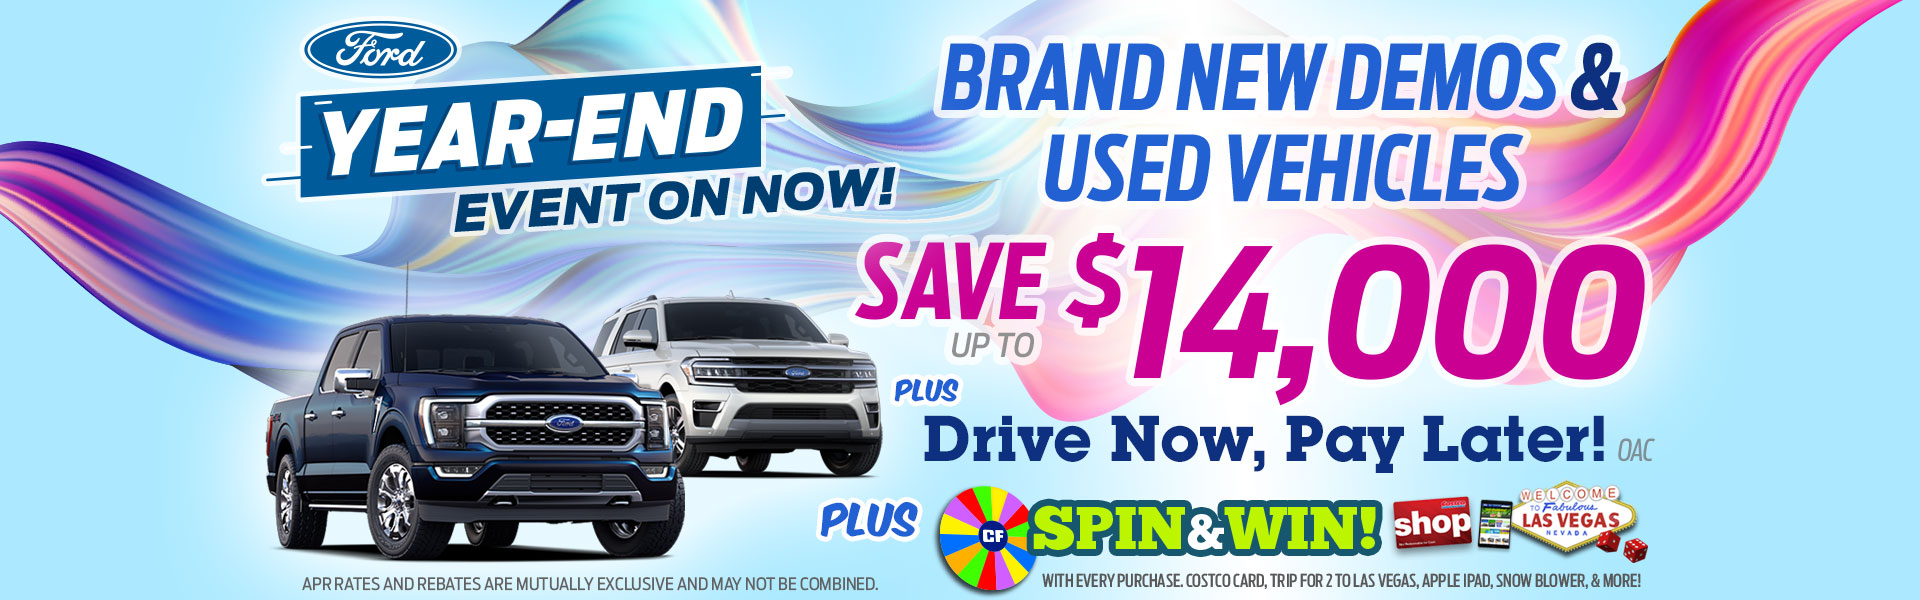 Year End New Ford Demo and Used Vehicle Sale!